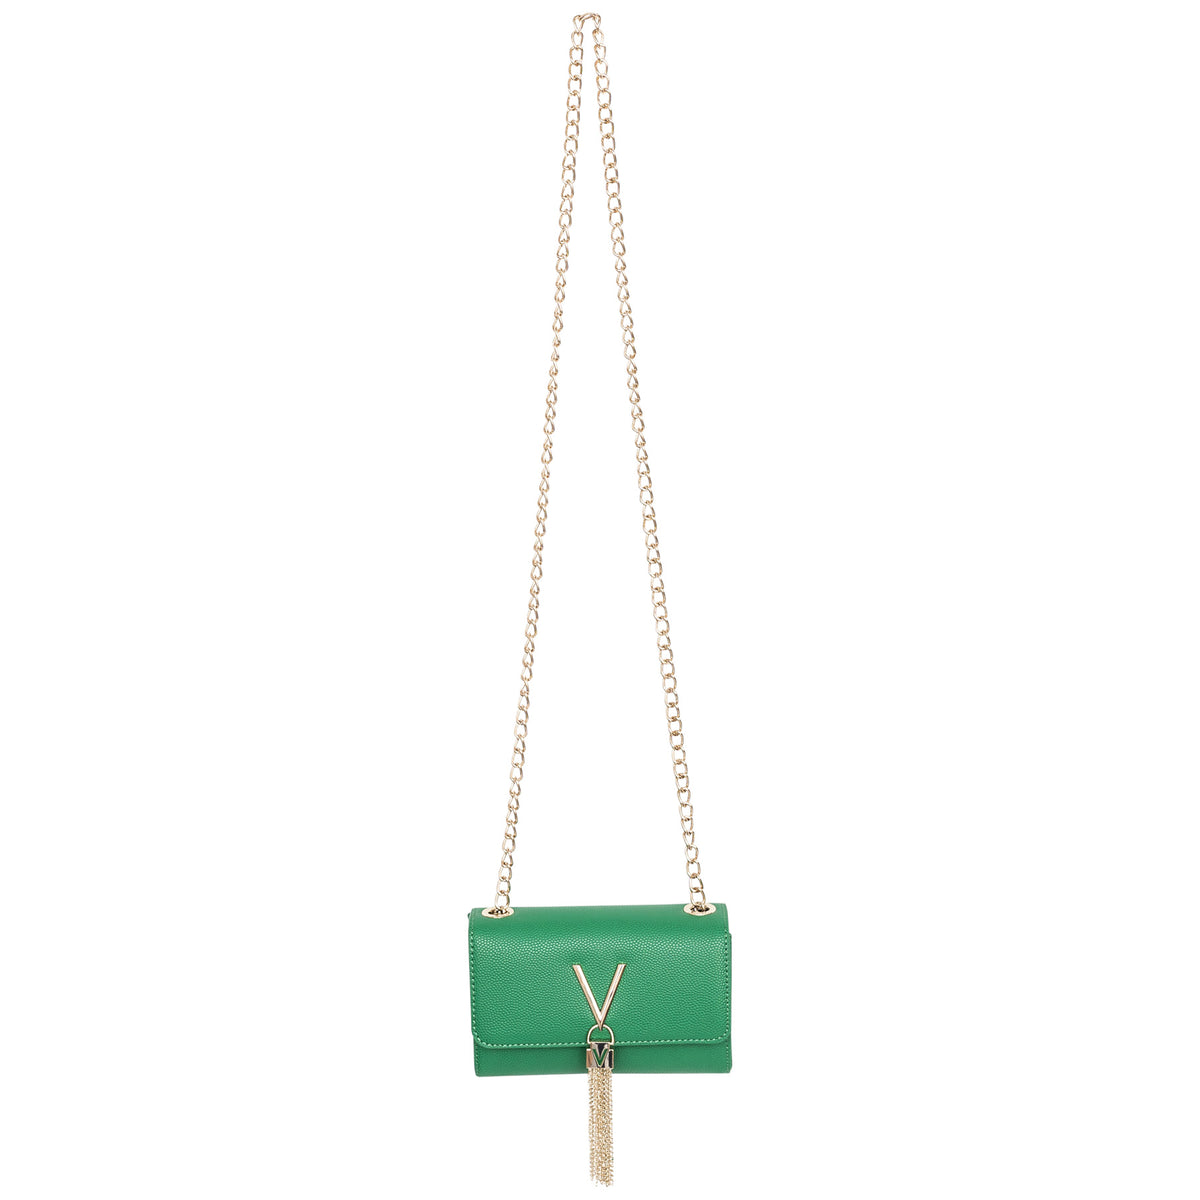 Load image into Gallery viewer, Valentino Bags Verde Green Divina Crossbody Bag
